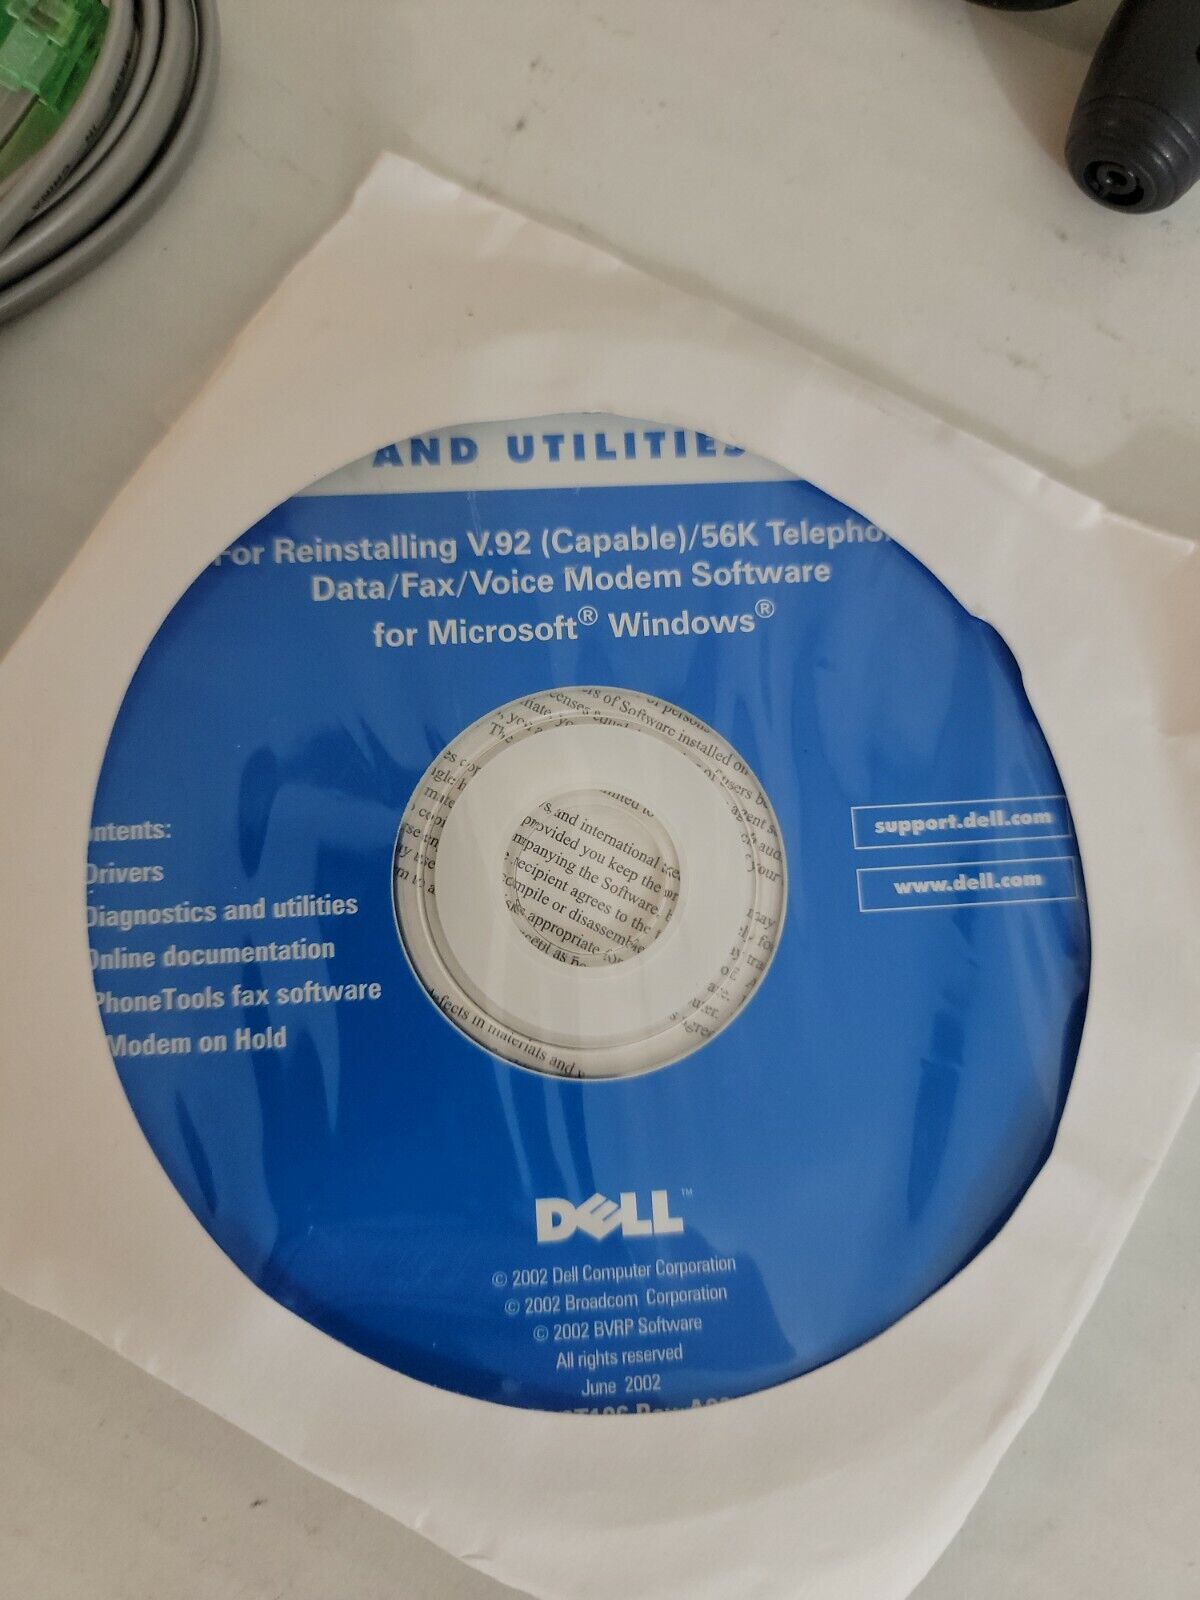 Dell Drivers & Utilities for Reinstalling V92 Data/Fax Modem P/N 9T300 Rev A00